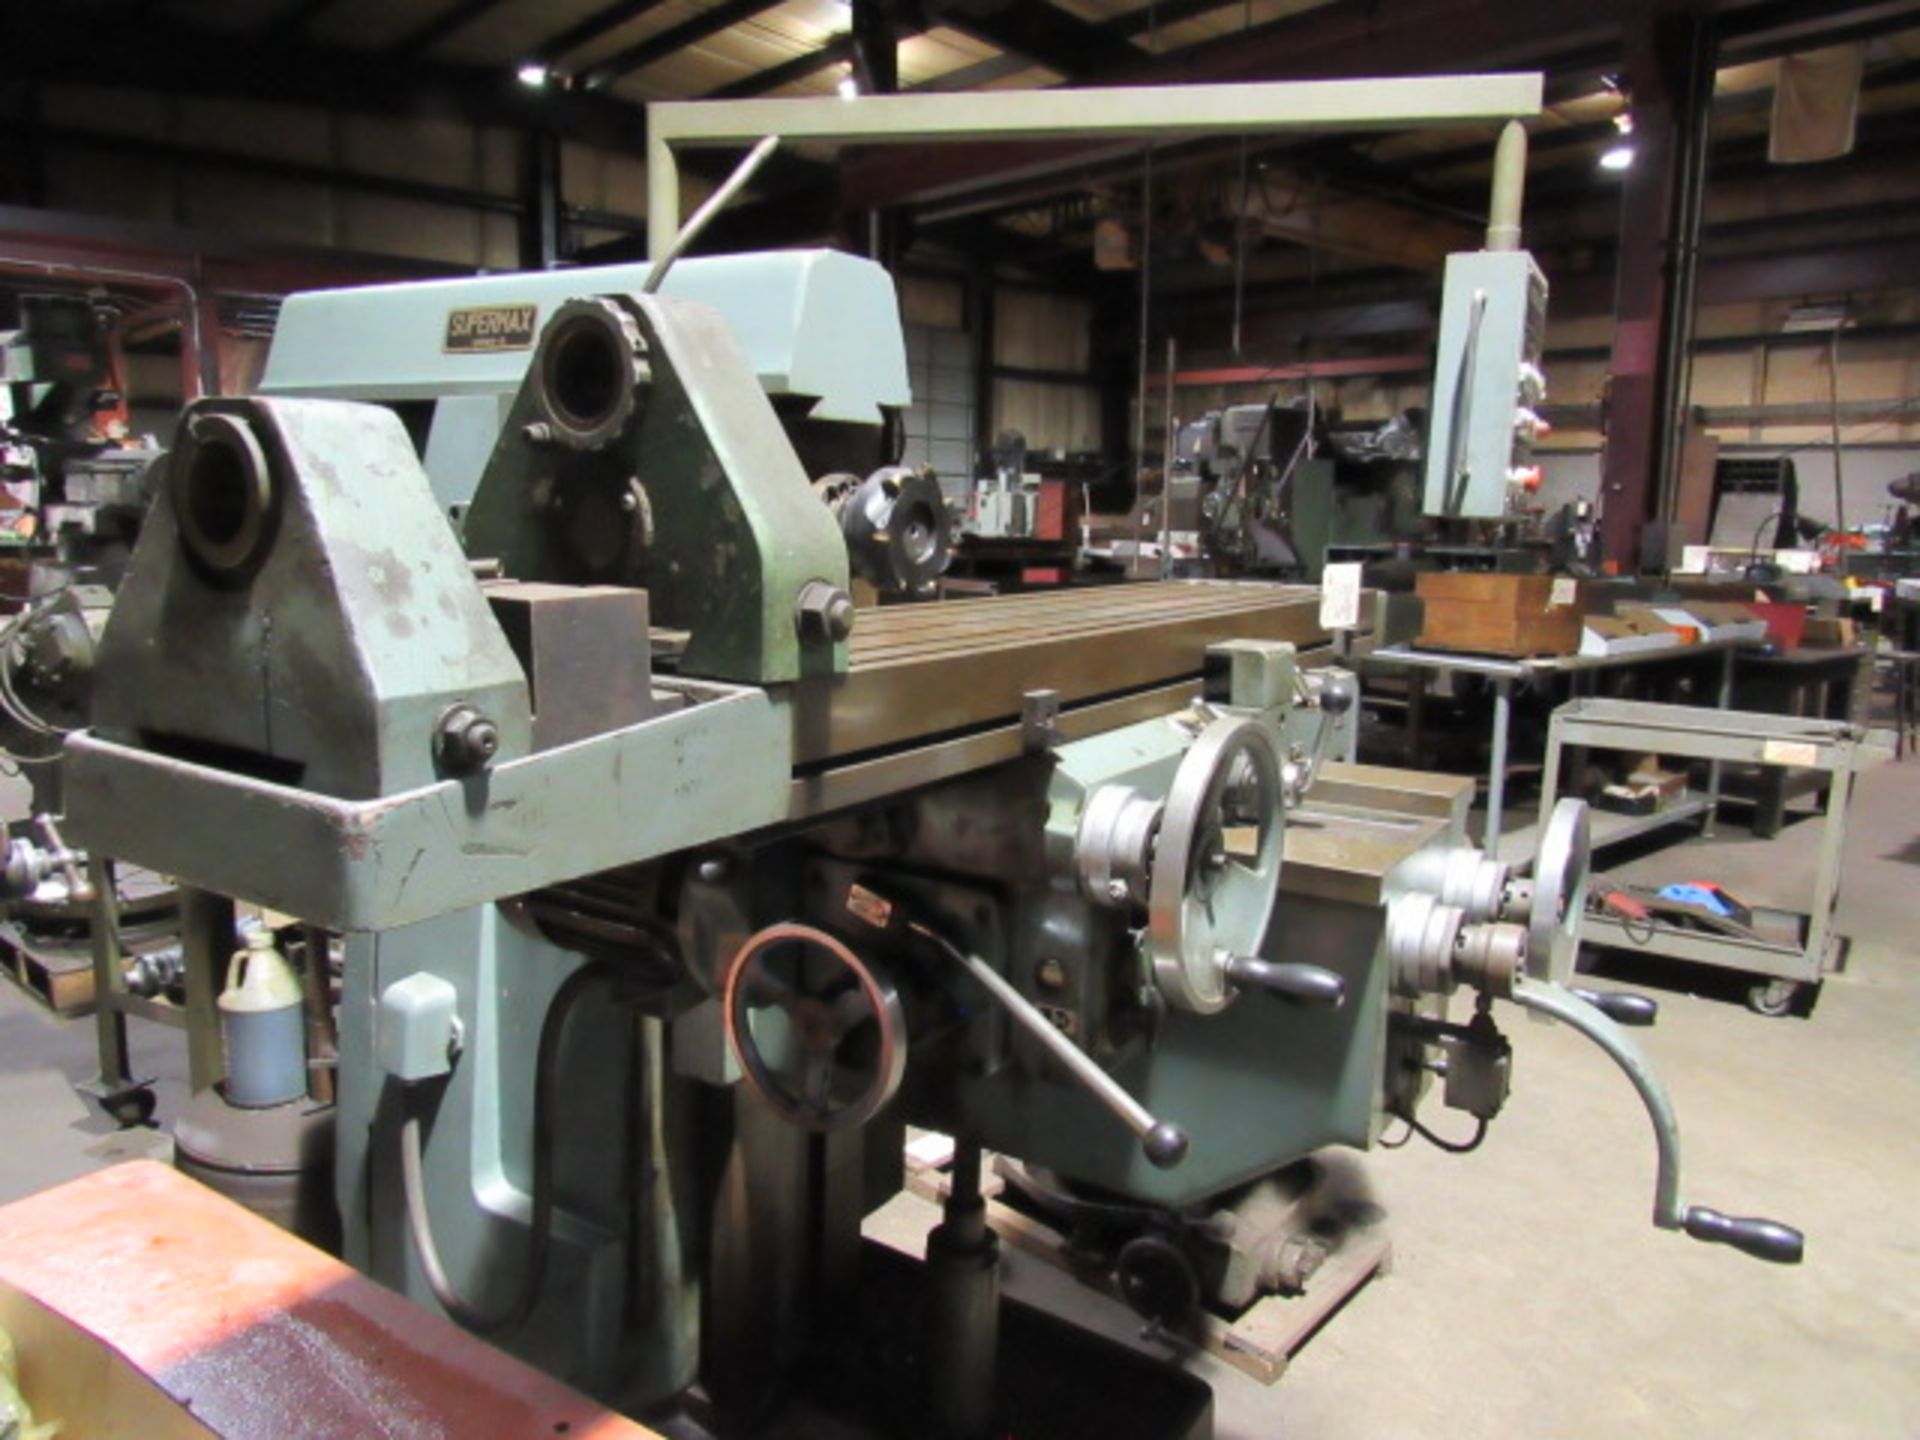 Supermax #50 Taper Horizontal Mill with 10'' x 60'' Power Feed Table, Pendant Controls, Spindle - Image 4 of 6